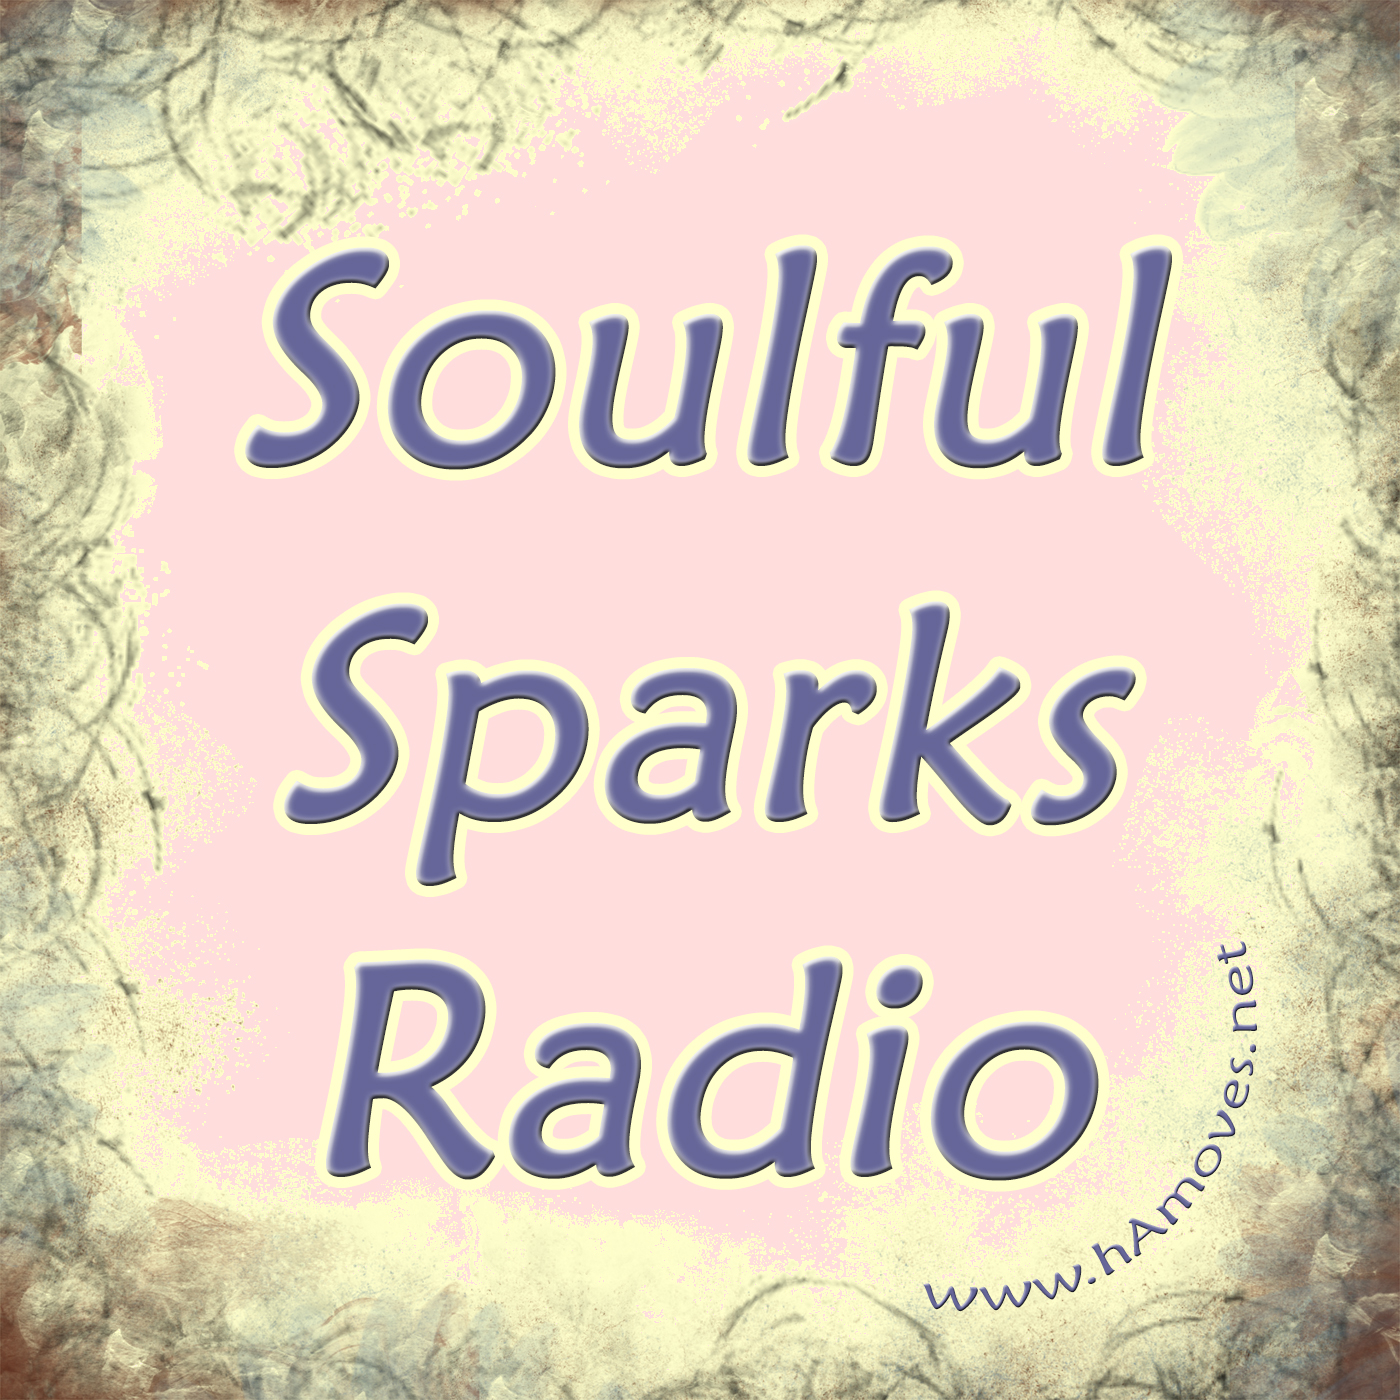 Soulful Sparks Radio… every Sunday at 9 pm EST...